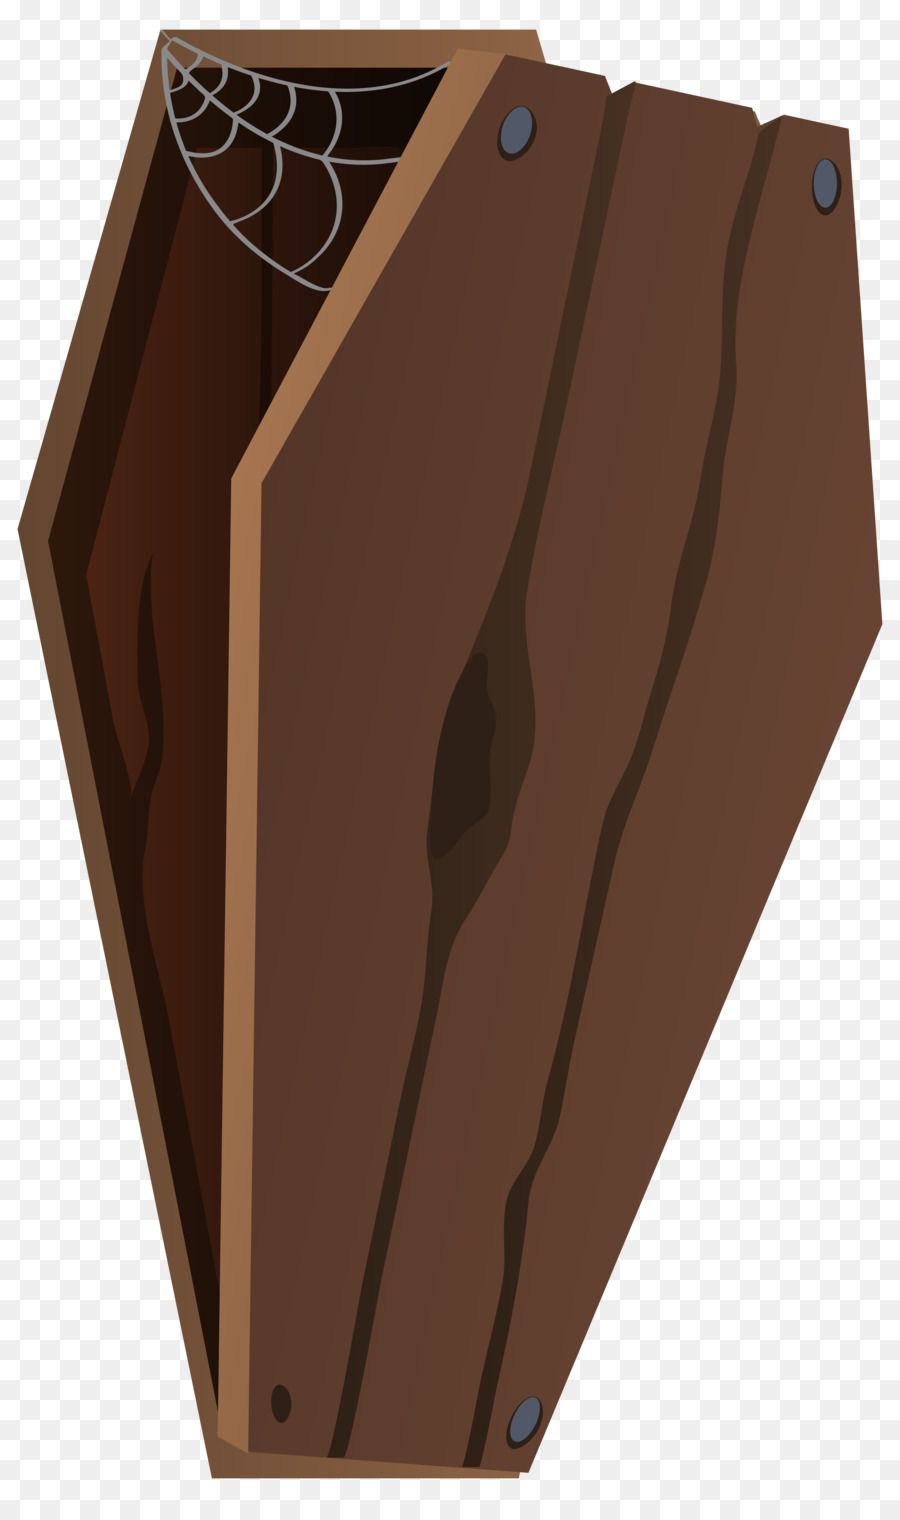 Coffin Wood Stain png download.